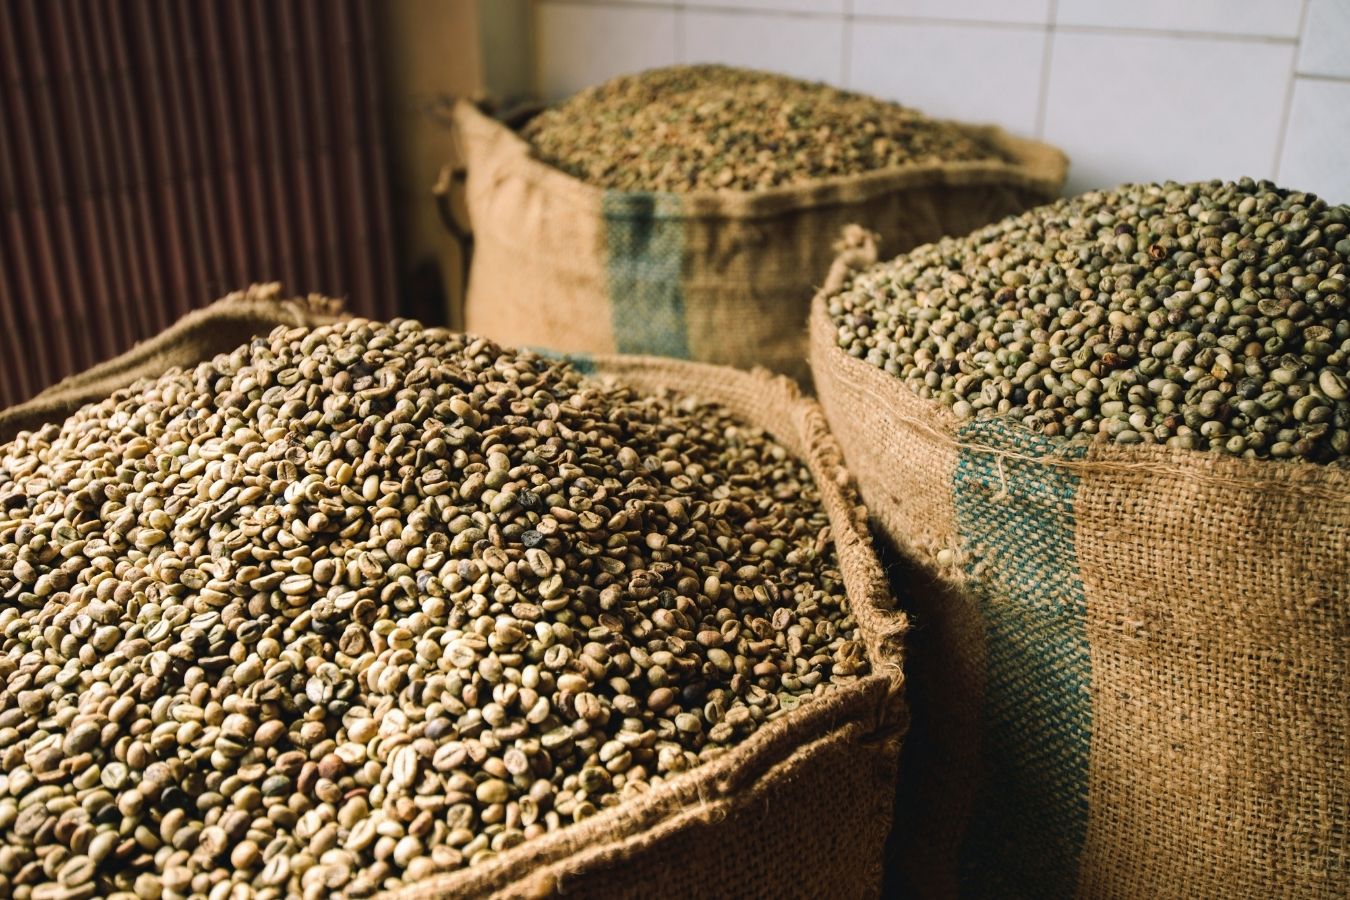 How To Pack Green Coffee Beans For Export According To International Standard Specifications